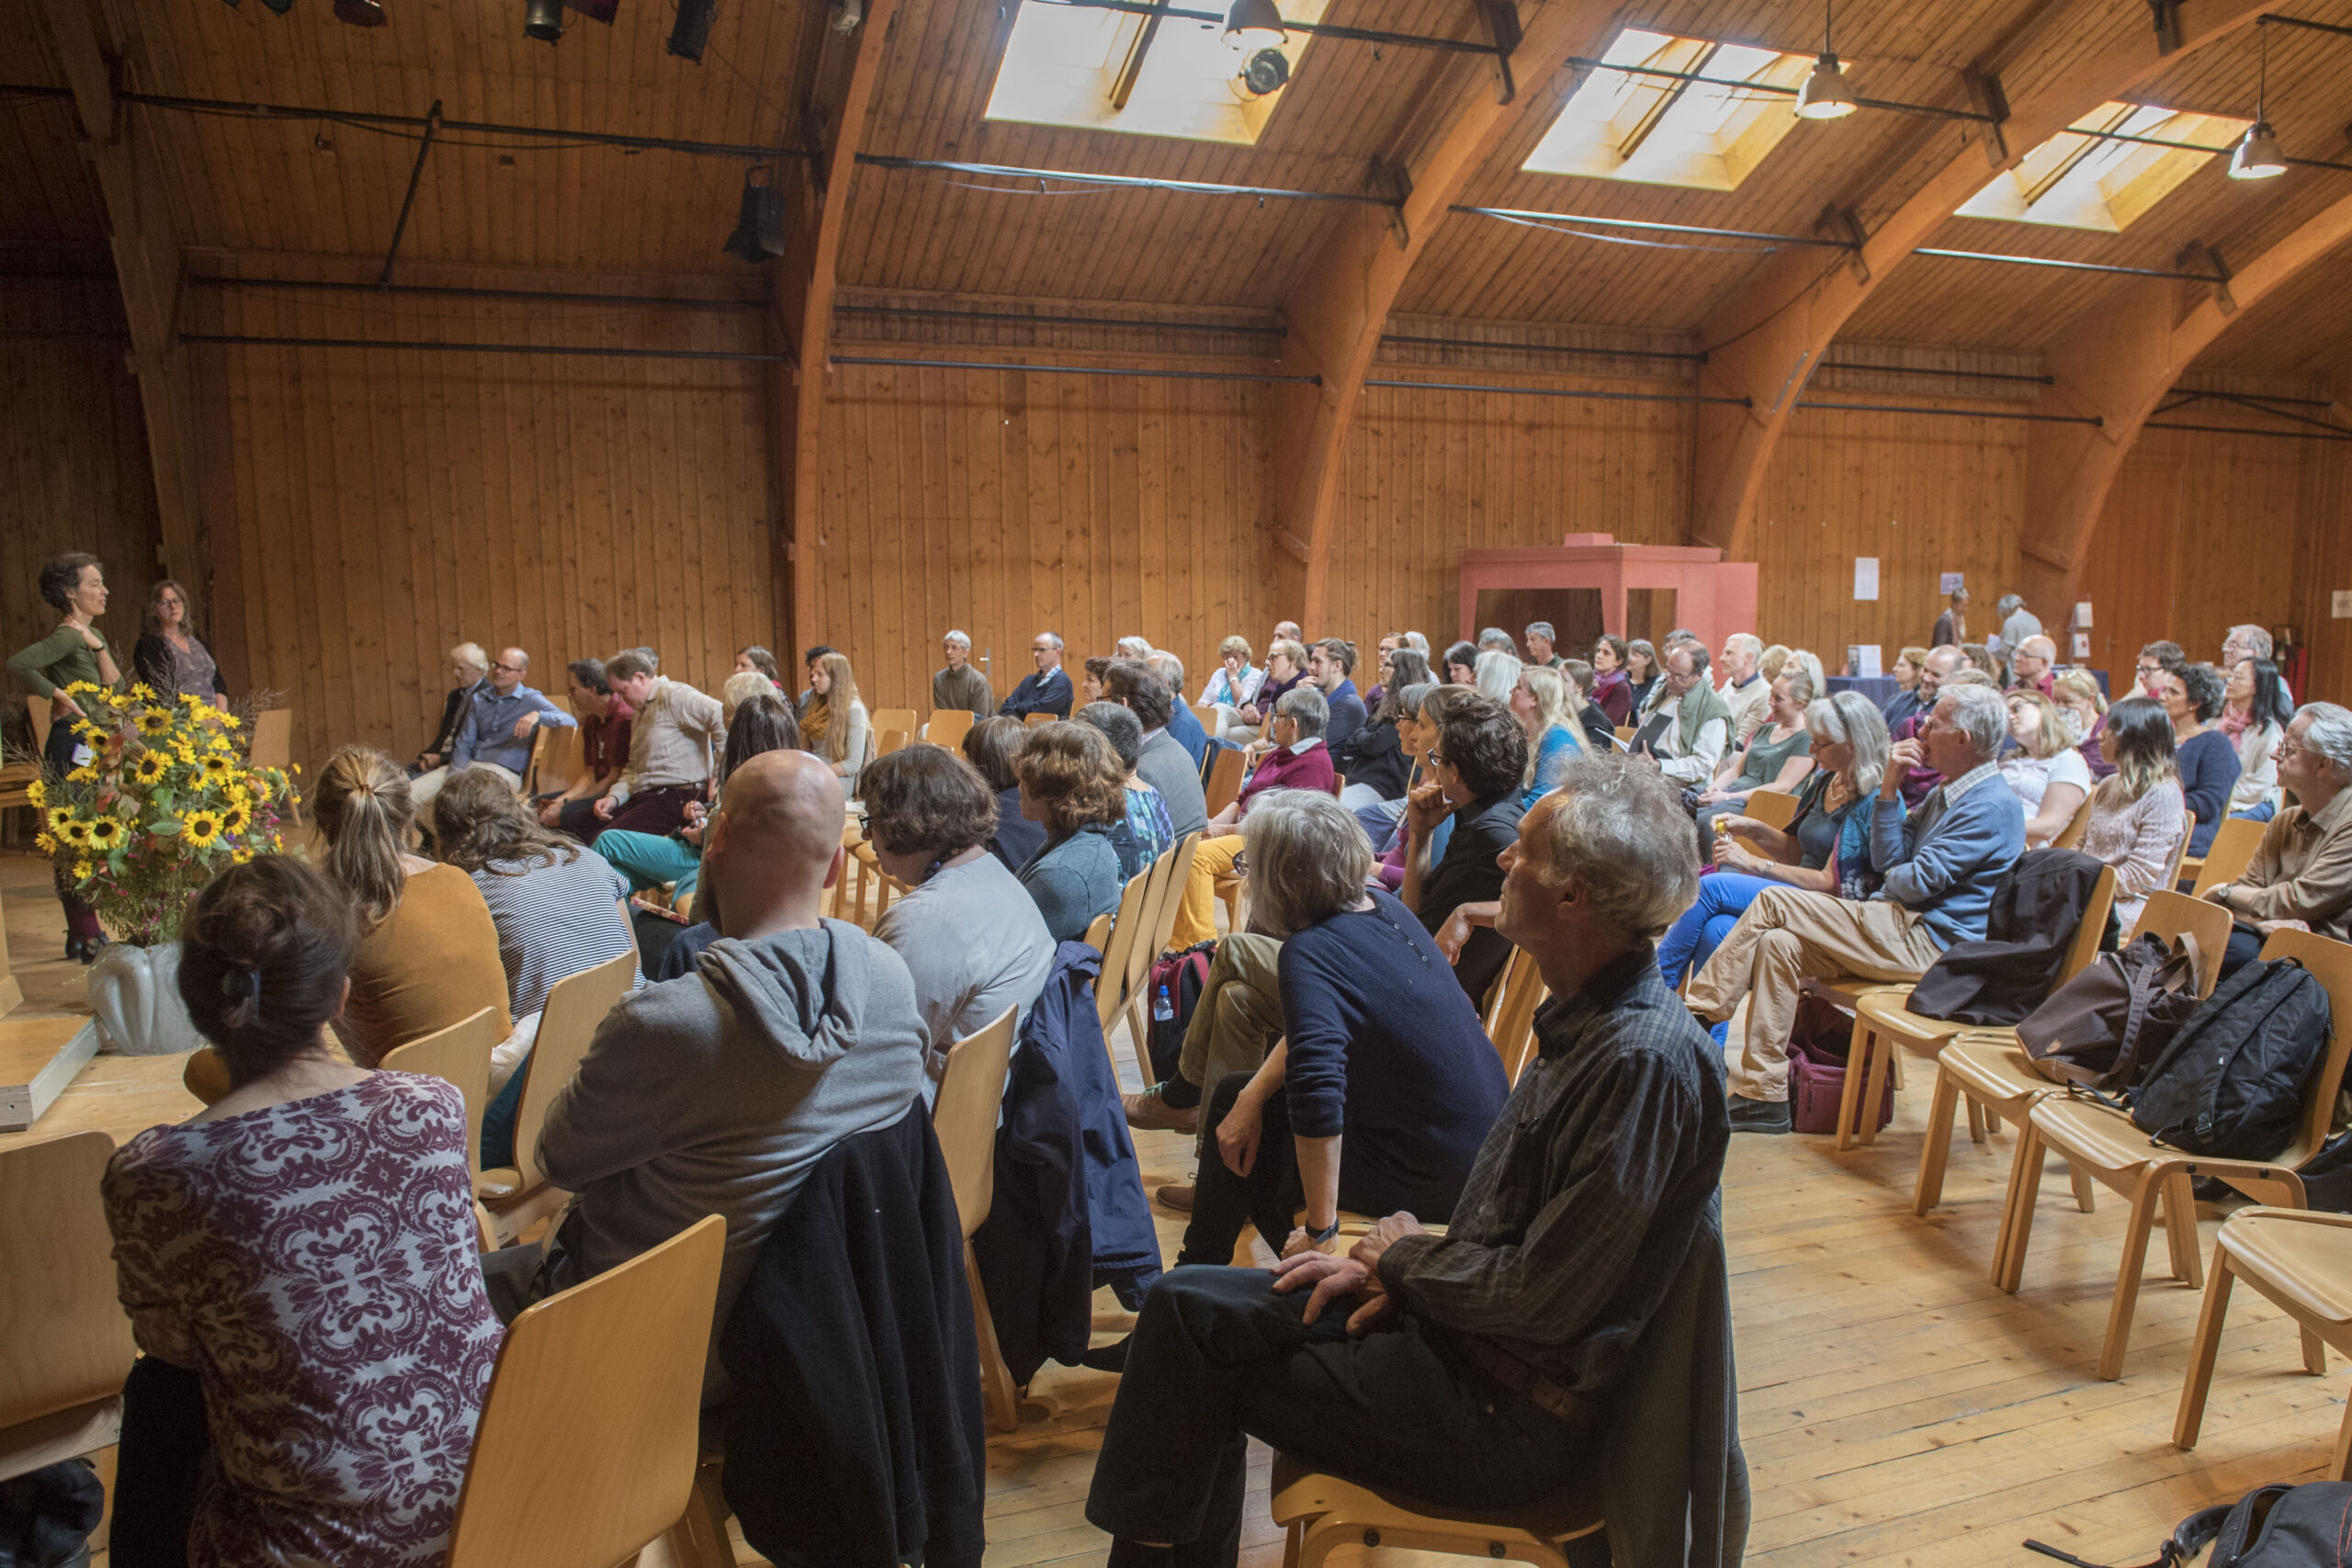 Autumn Conference of the Council 2019: October 3-5, 2019 at the Goetheanum